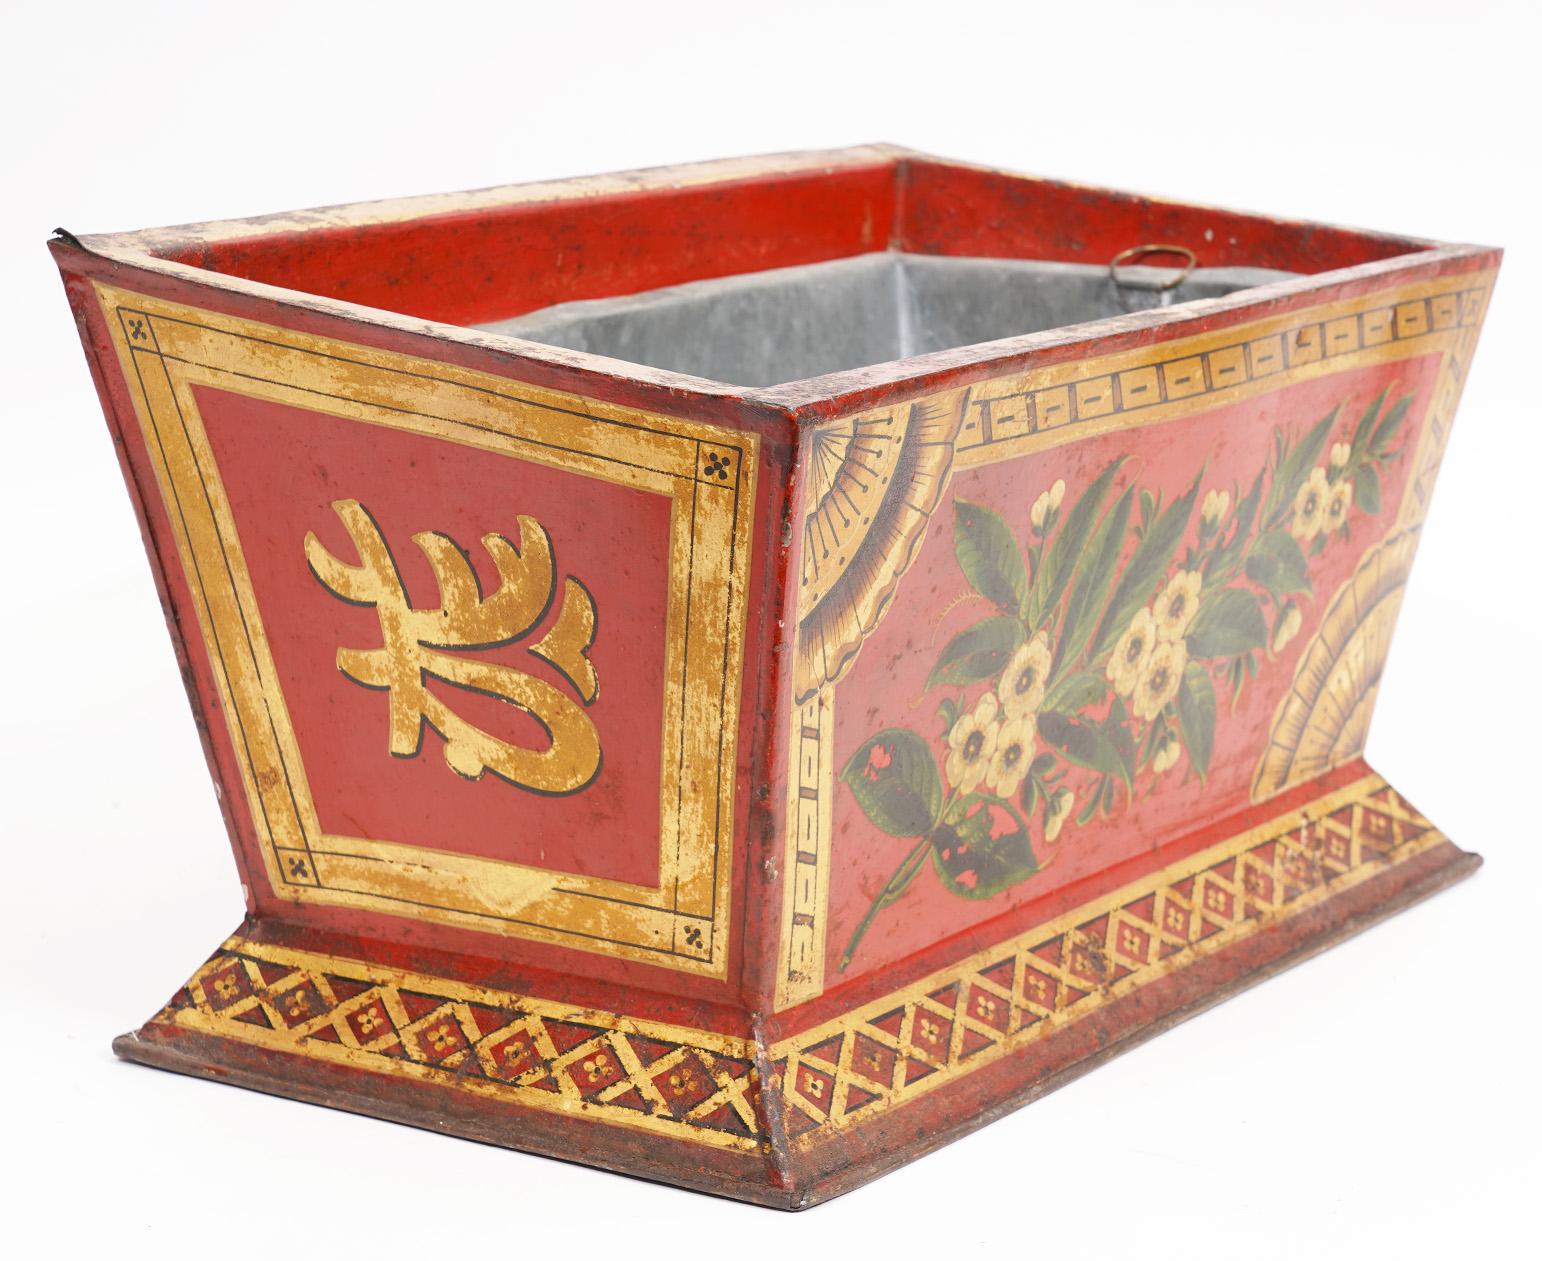 This charming English tole jardinière or planter dates to circa 1820. On an attractive red ground it is decorated with gilt borders and patterns enhanced by colorful flowers and leaf work. The interior is lined with zinc.